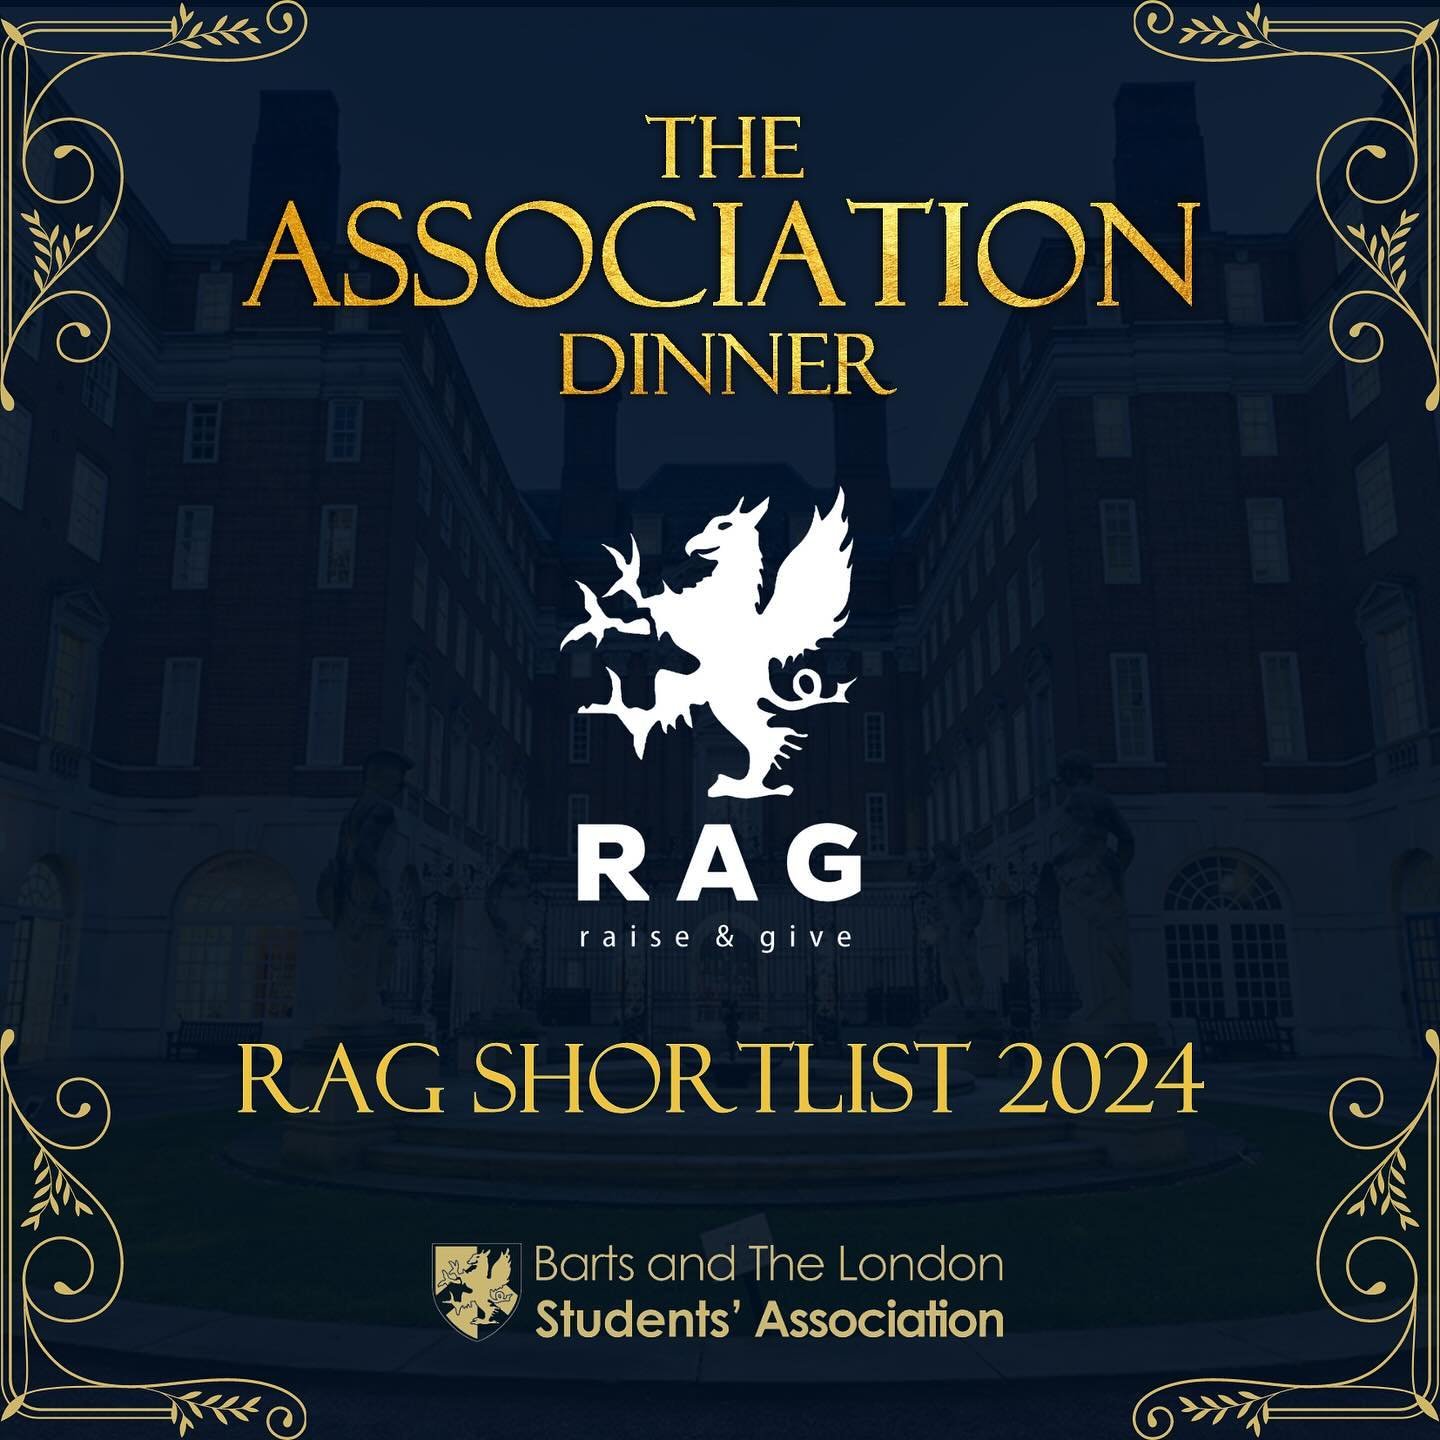 🚨The Association Dinner RAG Shortlist is out now!🚨

A huge thank you to each and every student who has helped to raise money this year, whether that was for our RAG Charities or not! We&rsquo;ve managed to raise an amazing &pound;16,267 this year, 